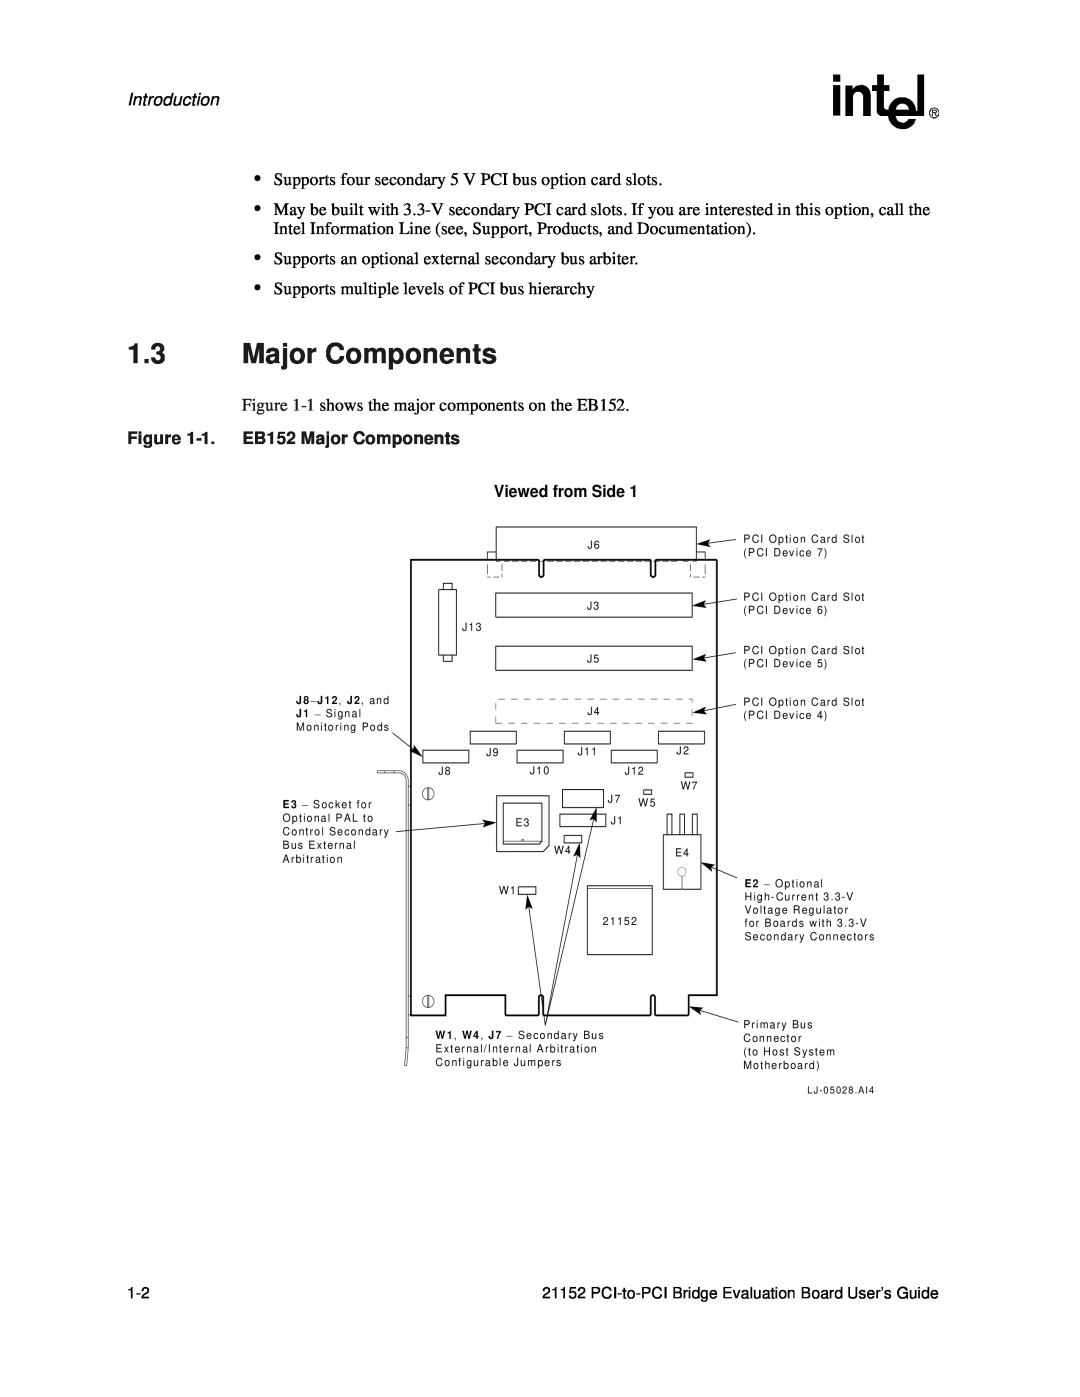 Intel 21152 manual Introduction, 1. EB152 Major Components, Viewed from Side 